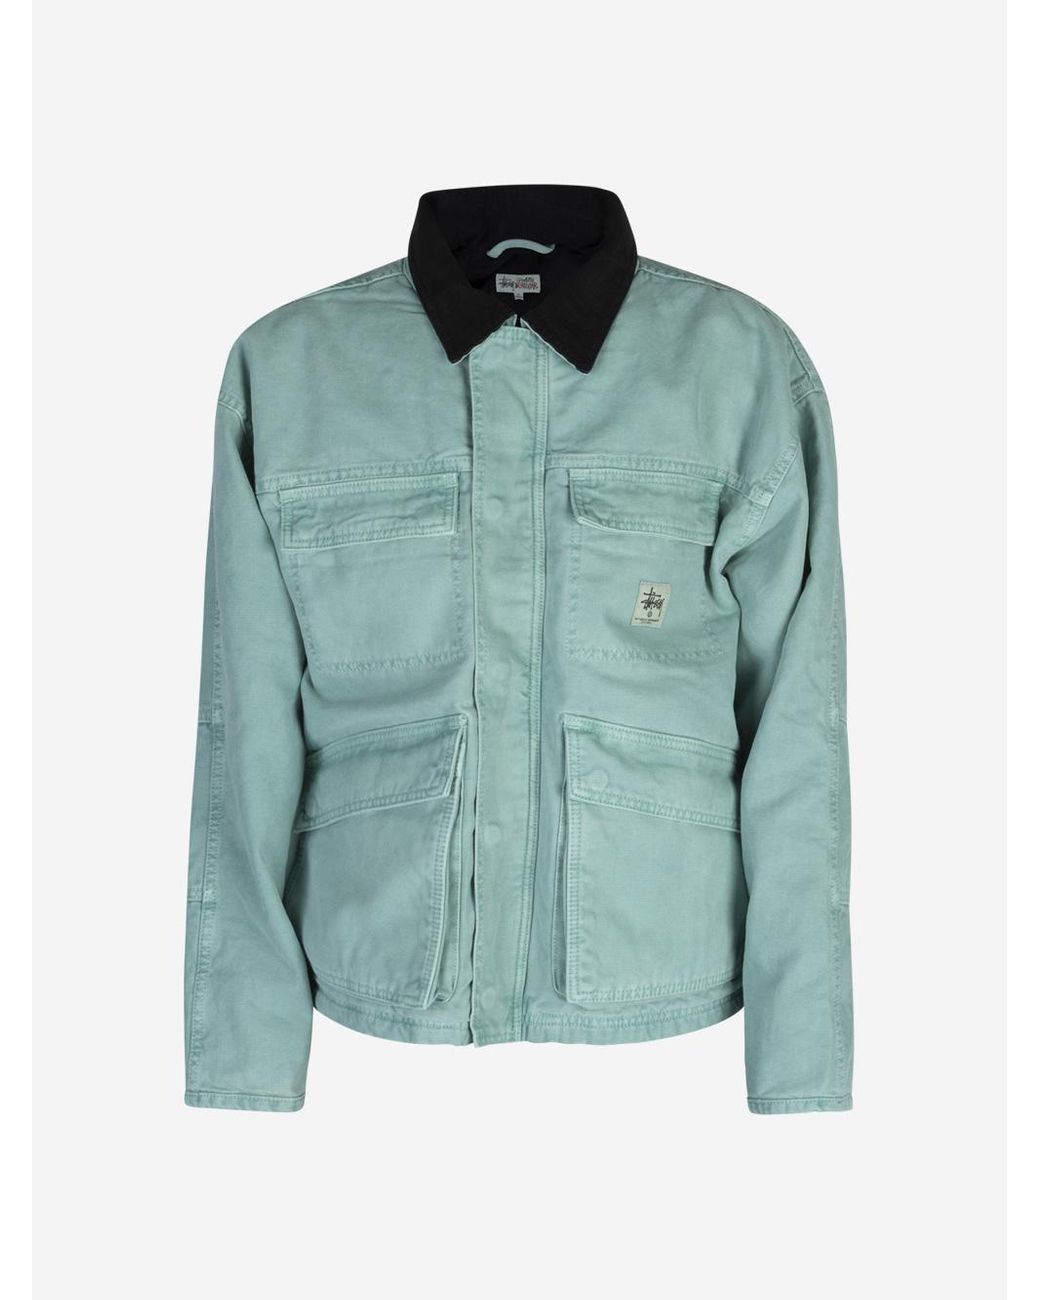 Stussy Washed Canvas Jacket in Green | Lyst UK